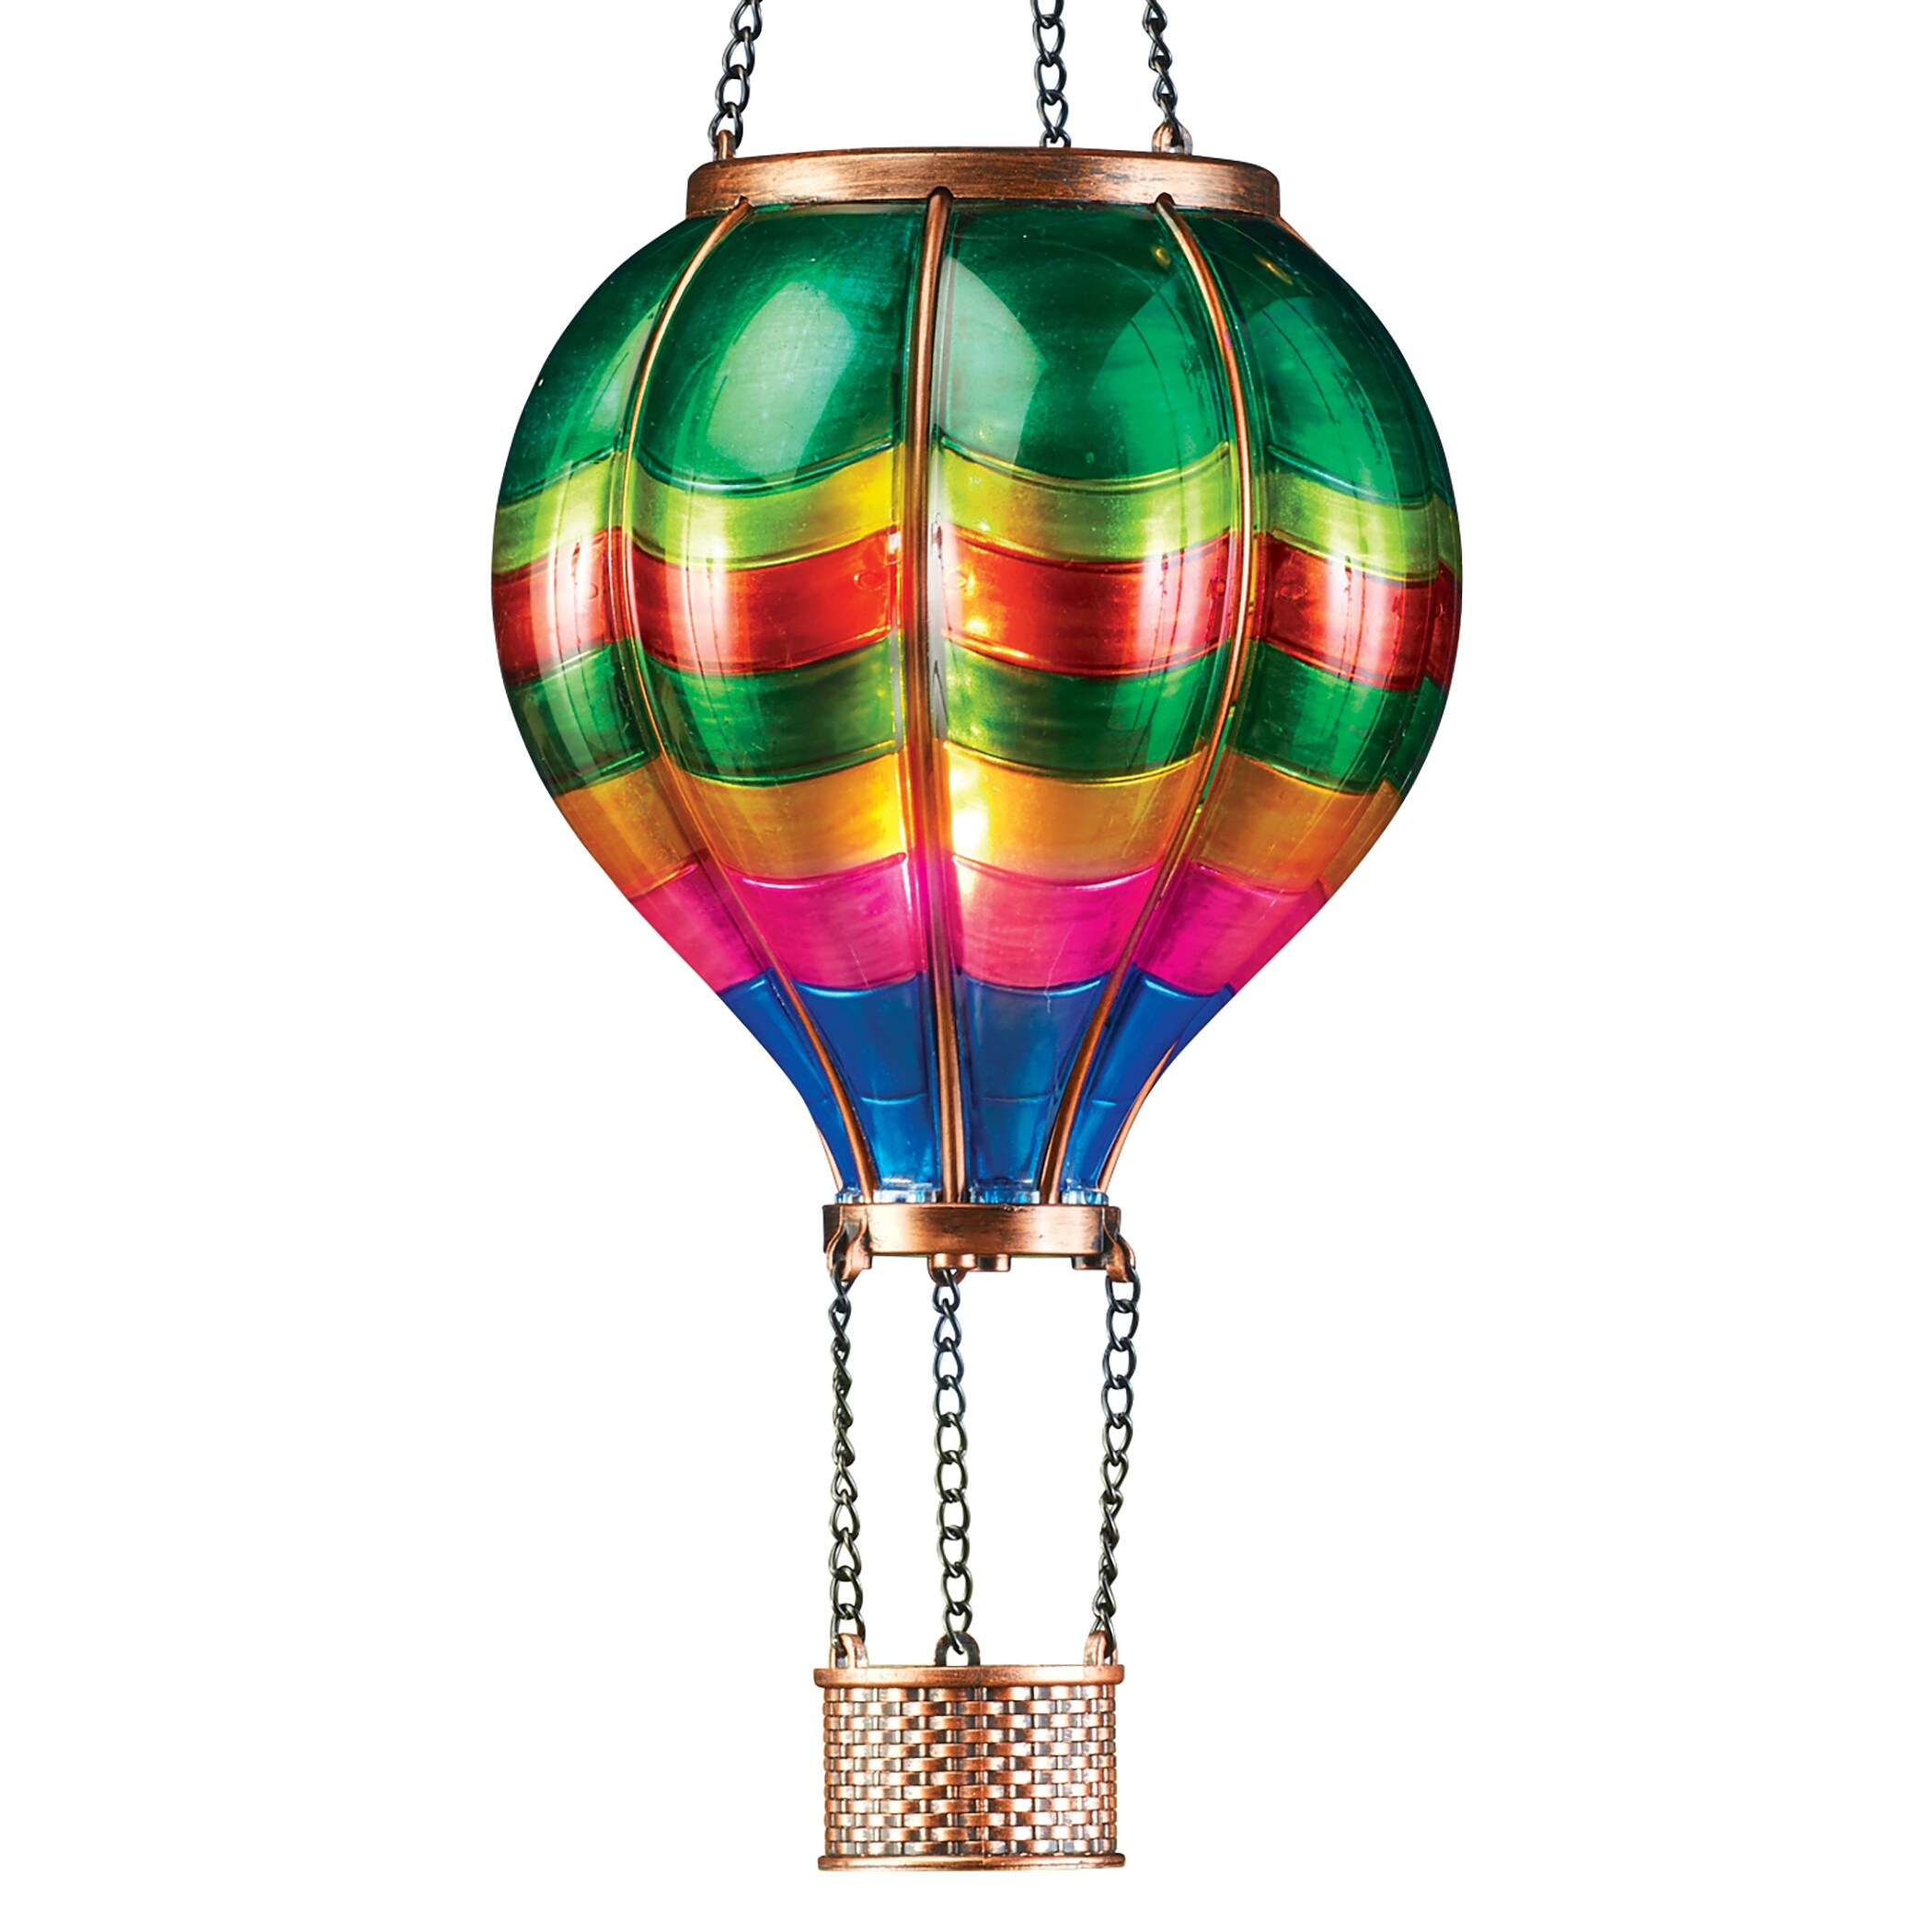 https://ak1.ostkcdn.com/images/products/is/images/direct/e07a55d28620a41d48091c554a2ee992fd2921a0/Solar-Powered-Colorful-Hot-Air-Balloon-Hanging-Mobile.jpg